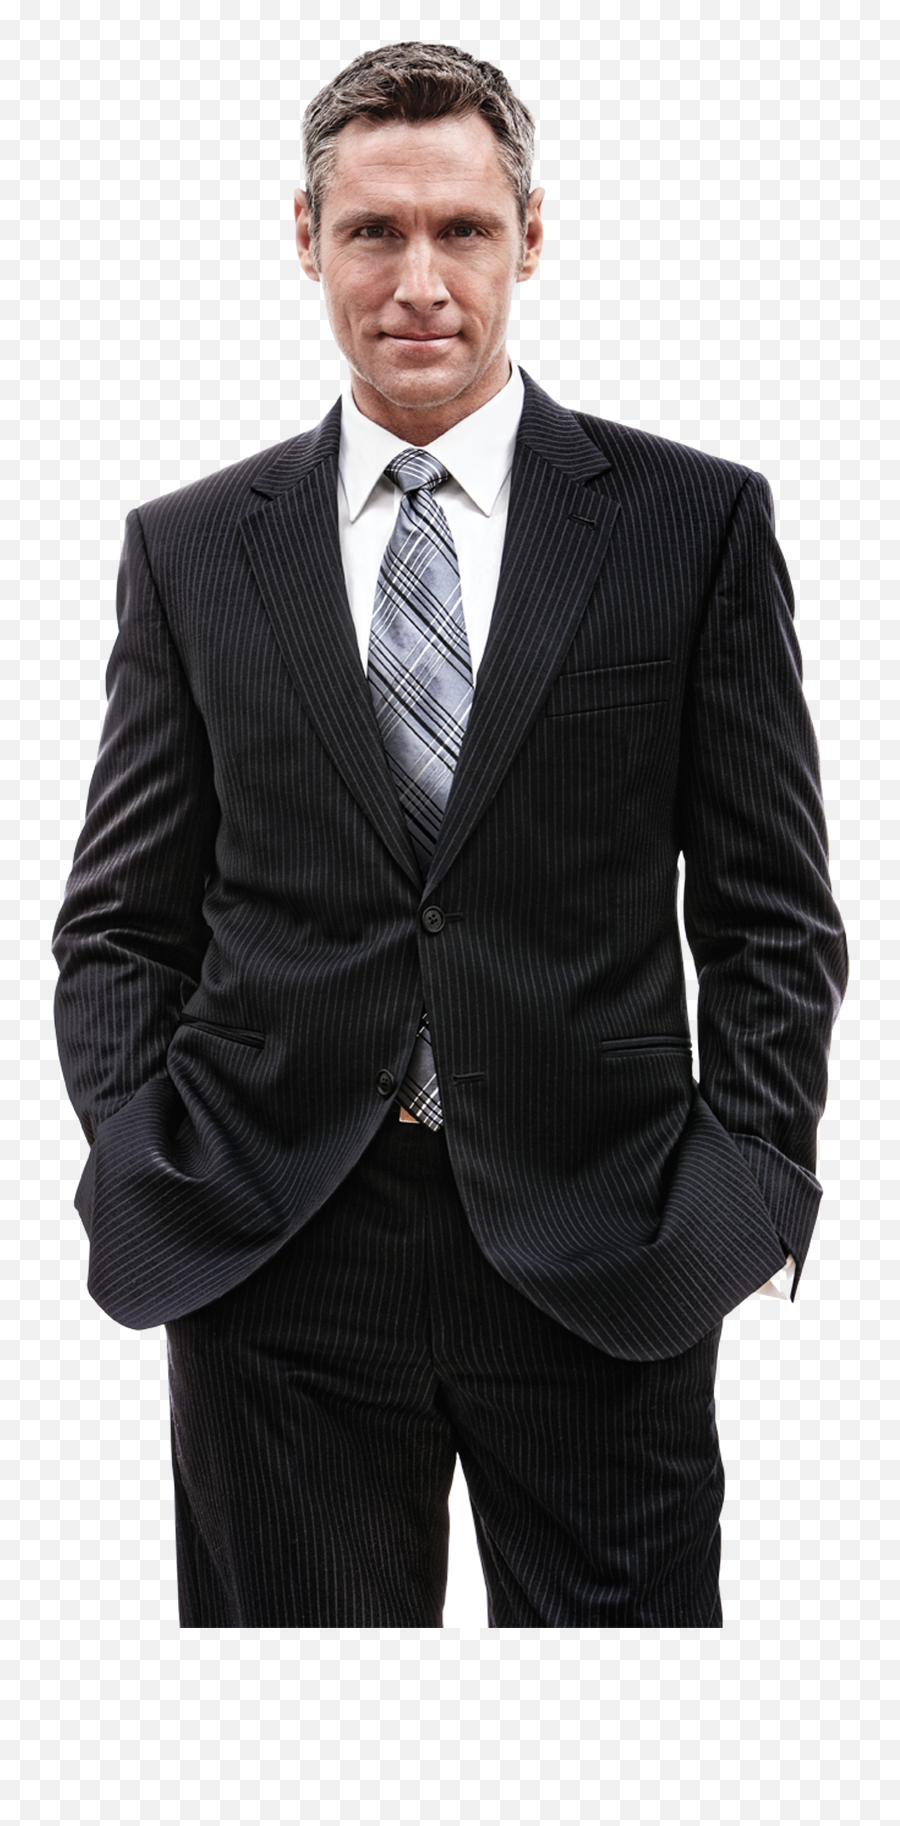 Business Man Png Image